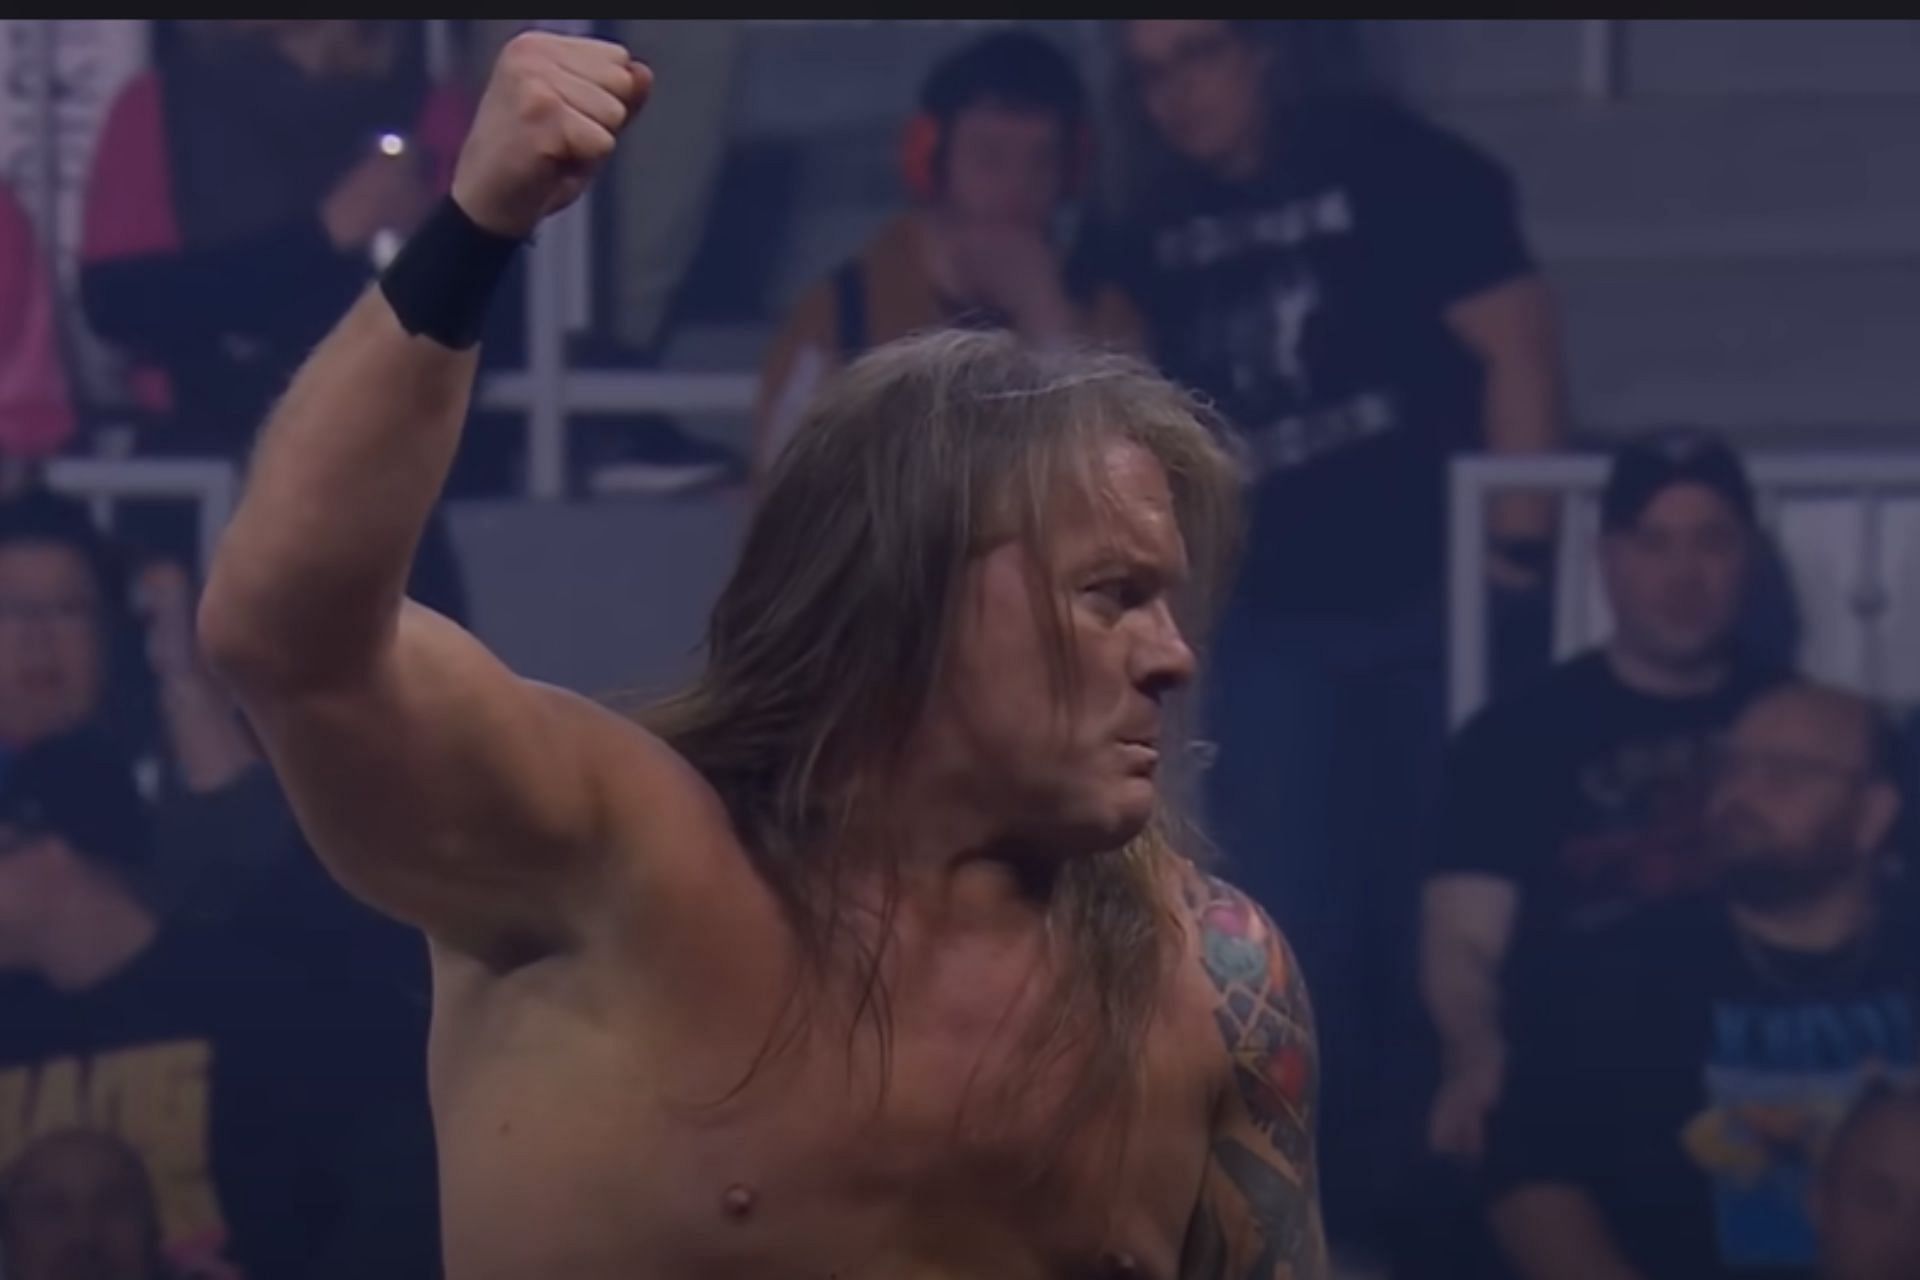 Chris Jericho is going through some negtive feedback [Image Source: AEW YouTube]